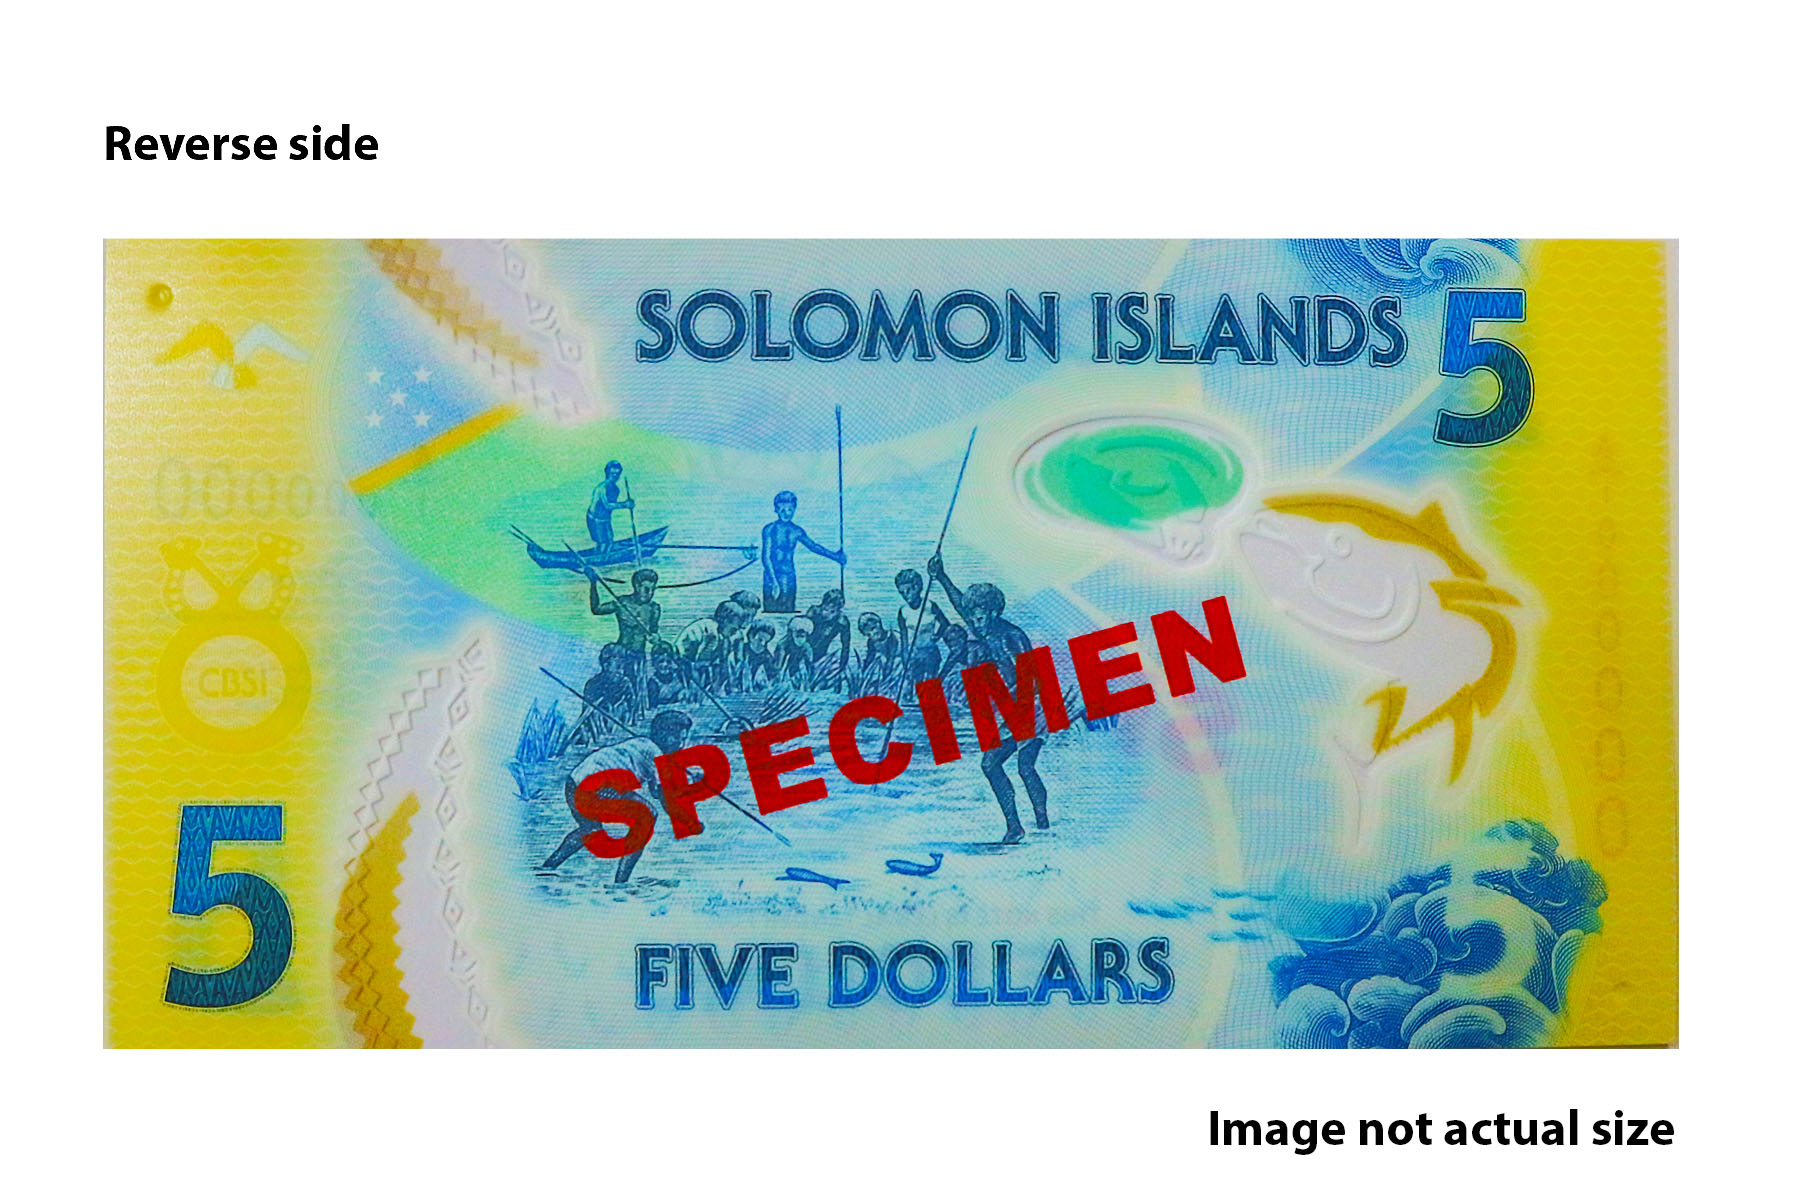 New $5 Polymer note - Reverse 